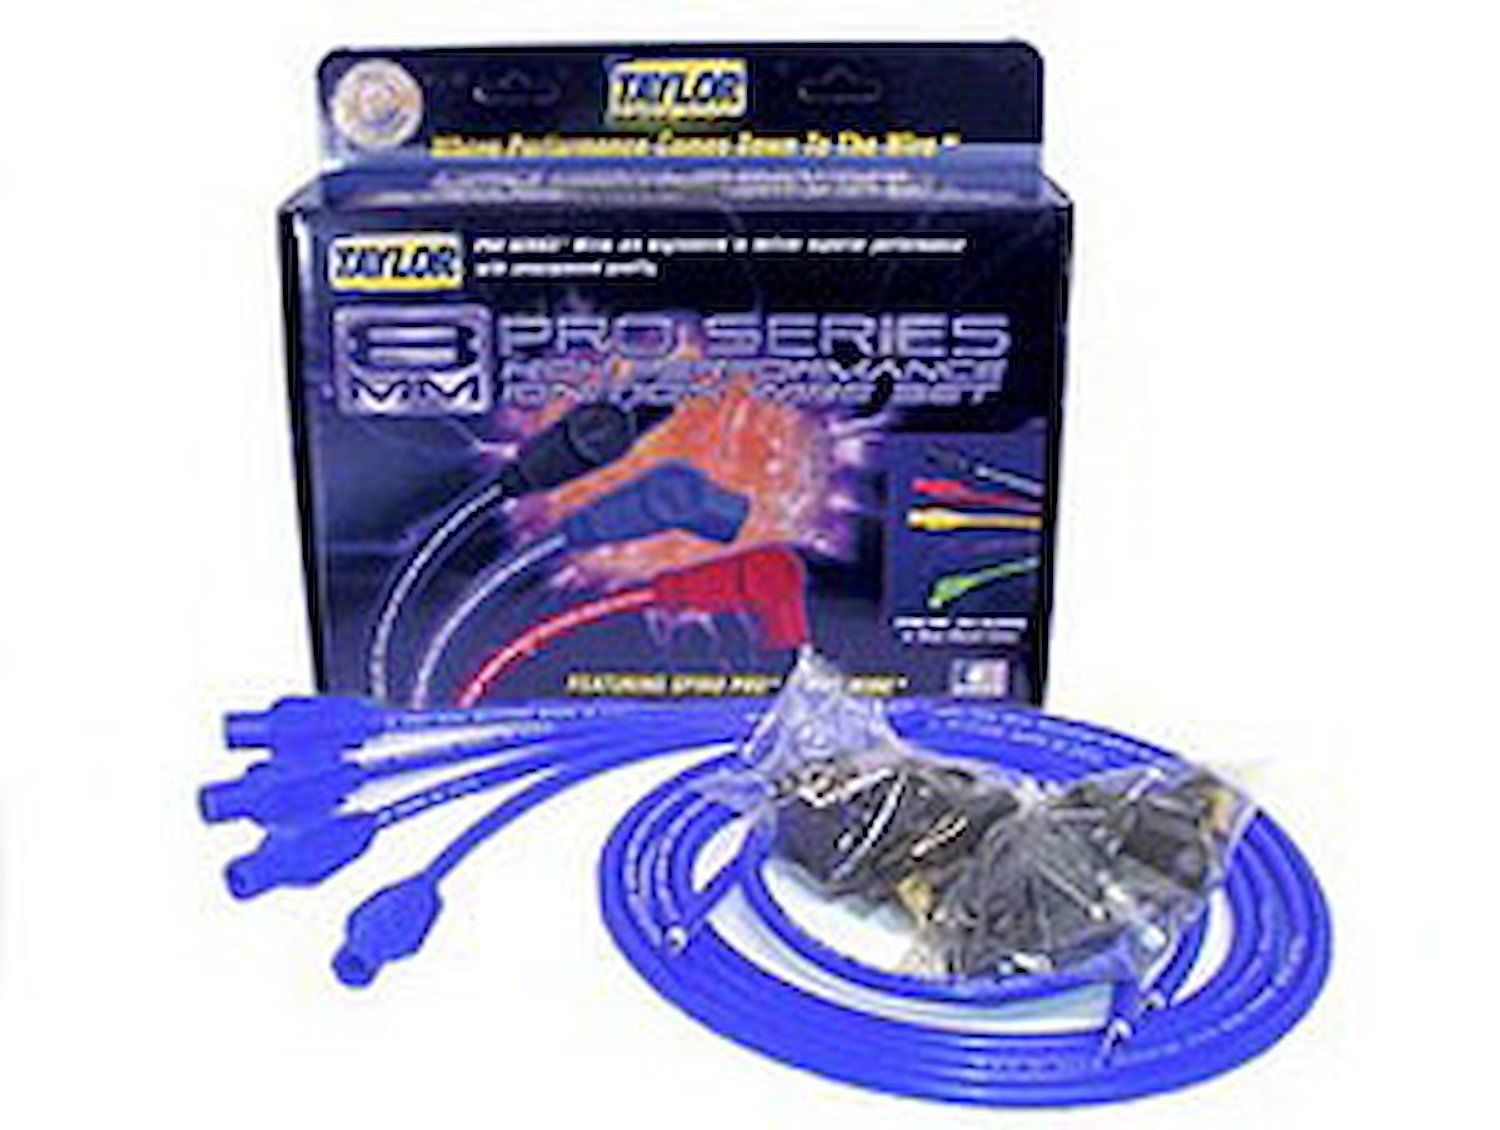 Spiro Pro 8mm Spark Plug Wires Universal Fit, 4 cyl